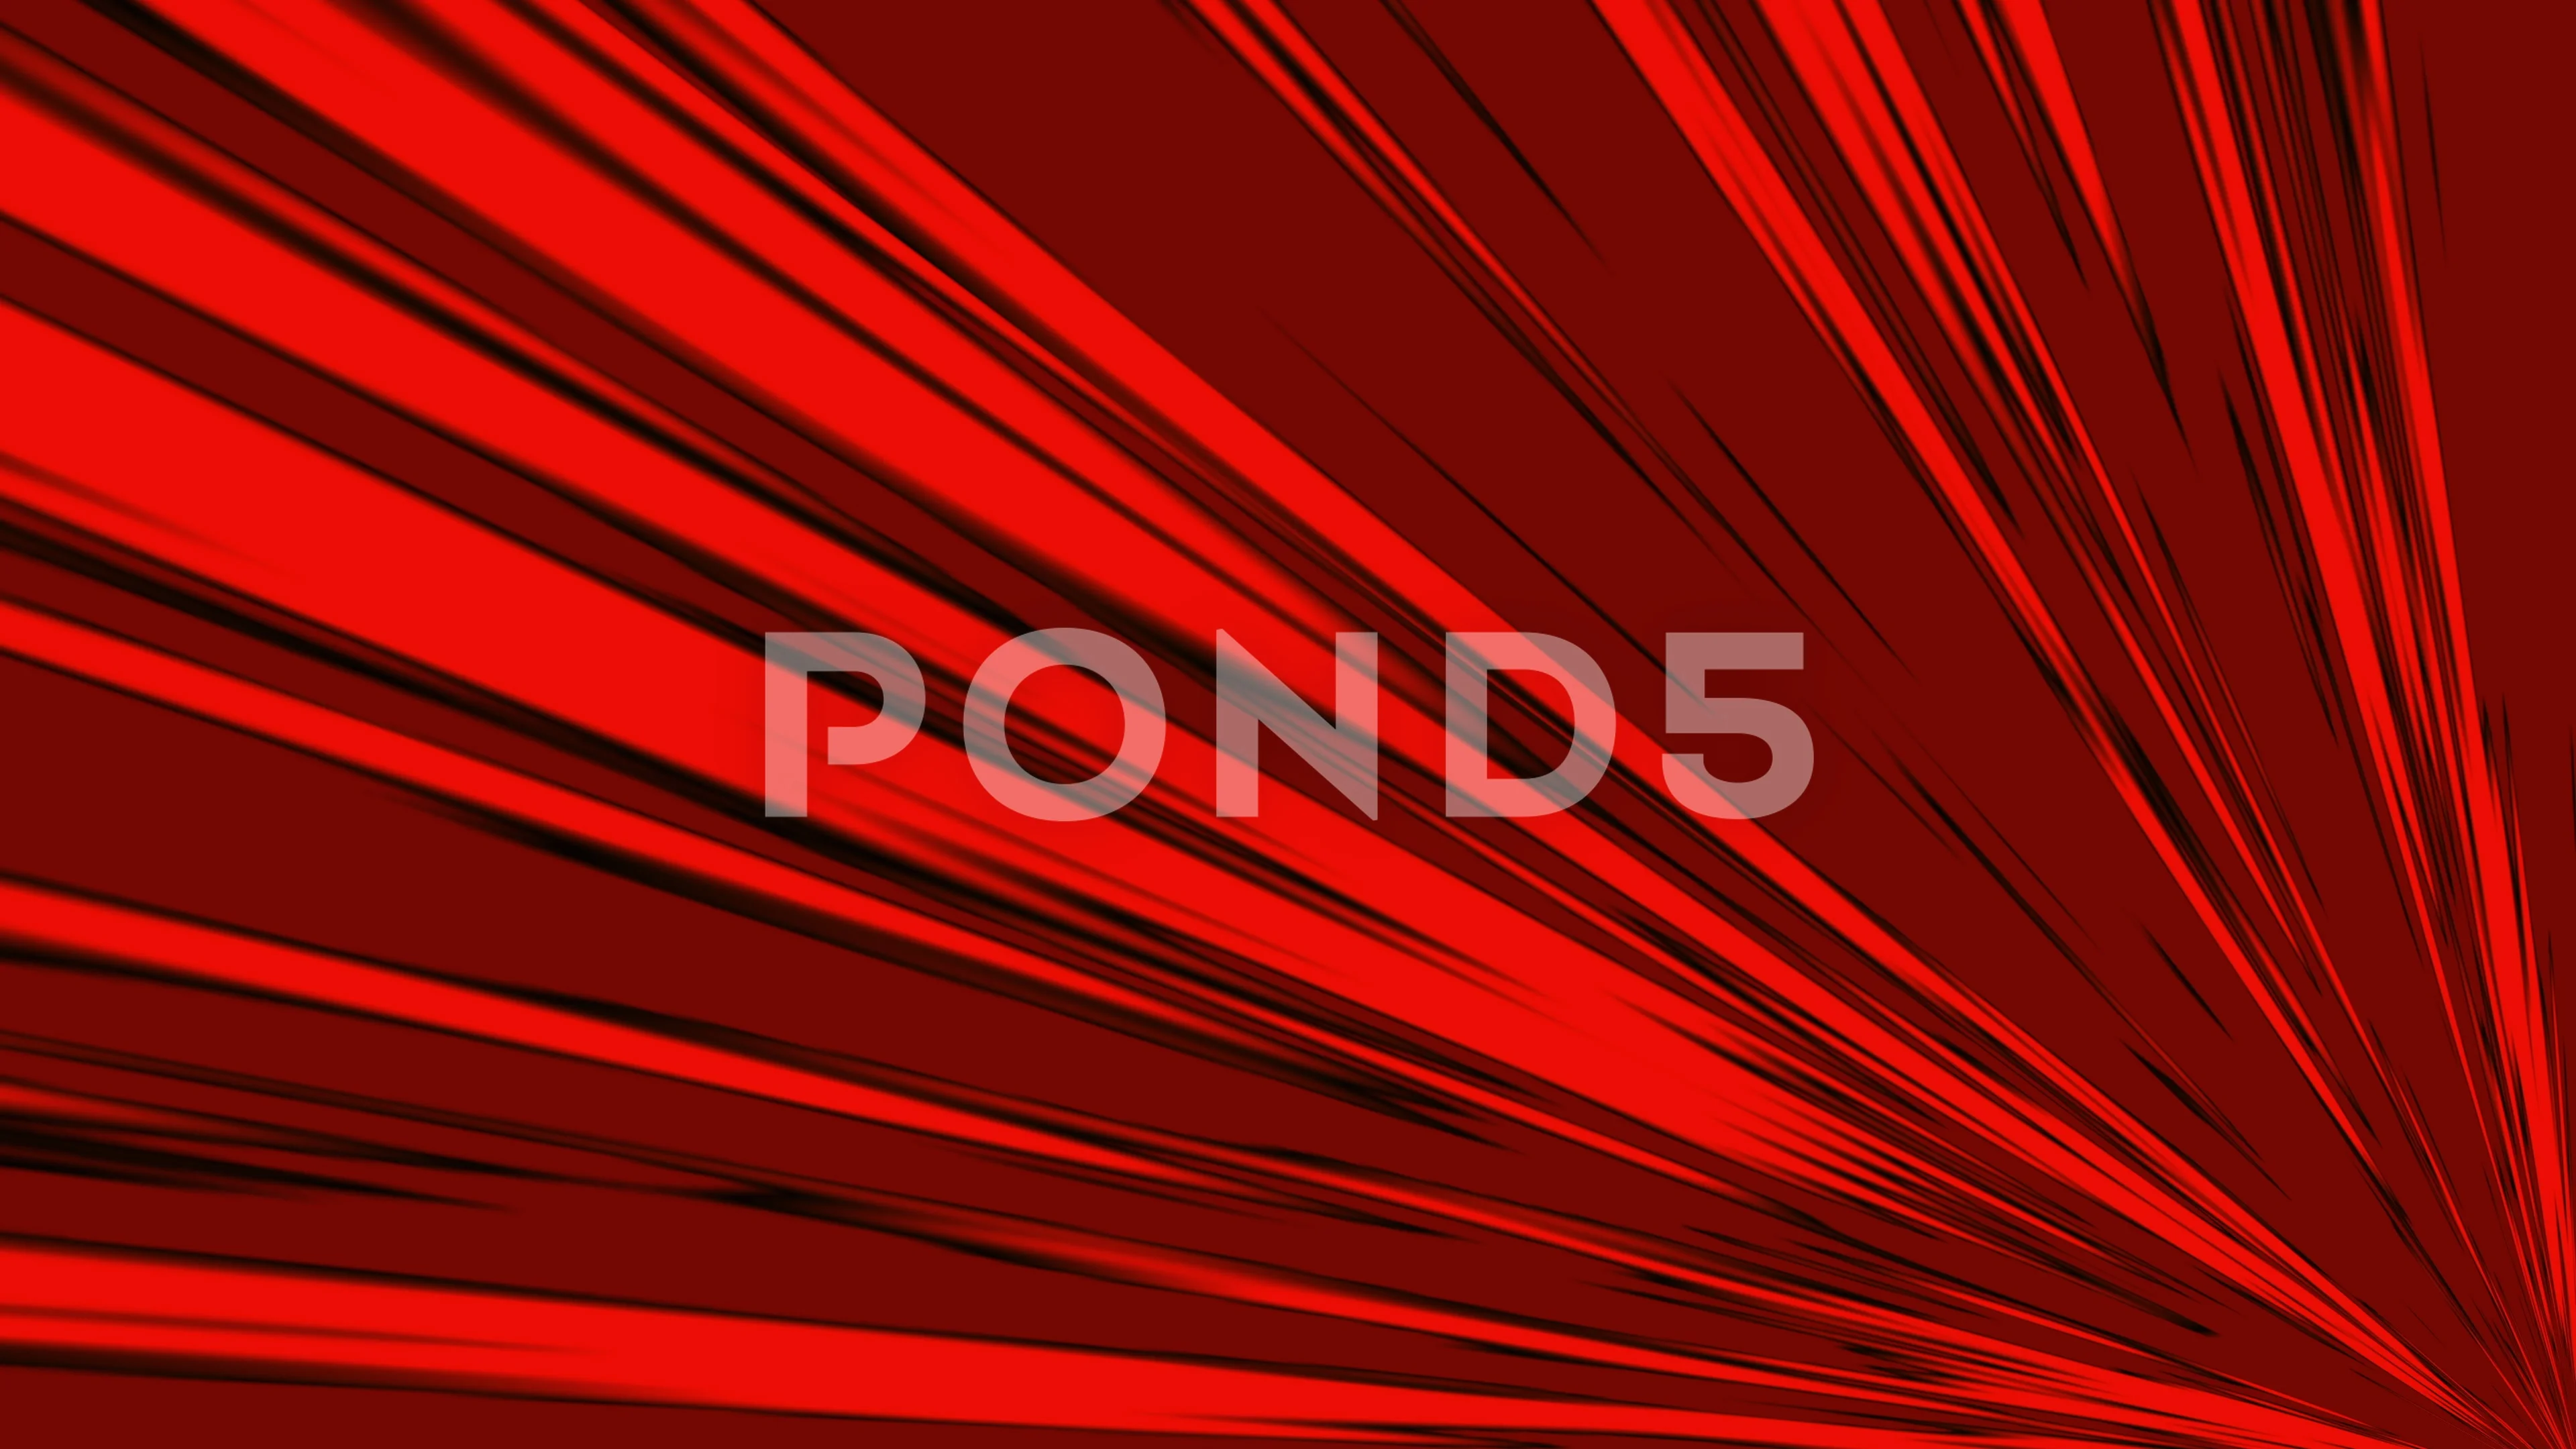 Anime speed lines background, computer generated 3d render - stock photo  2125964 | Crushpixel